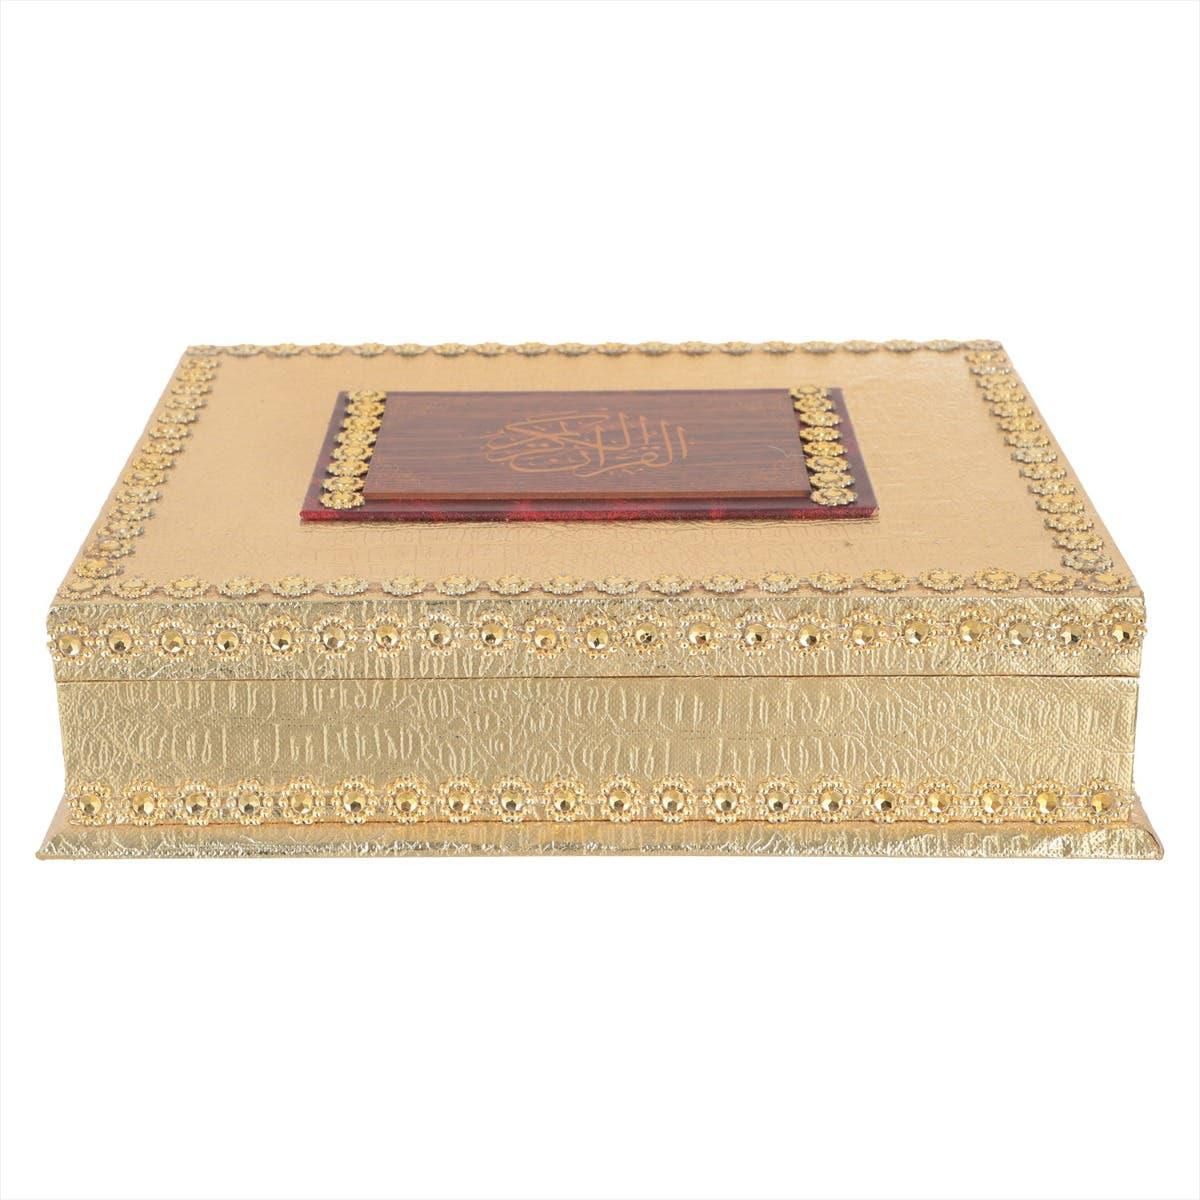 Get Wooden Box with Quran, 37×29×9 cm - Gold with best offers | Raneen.com